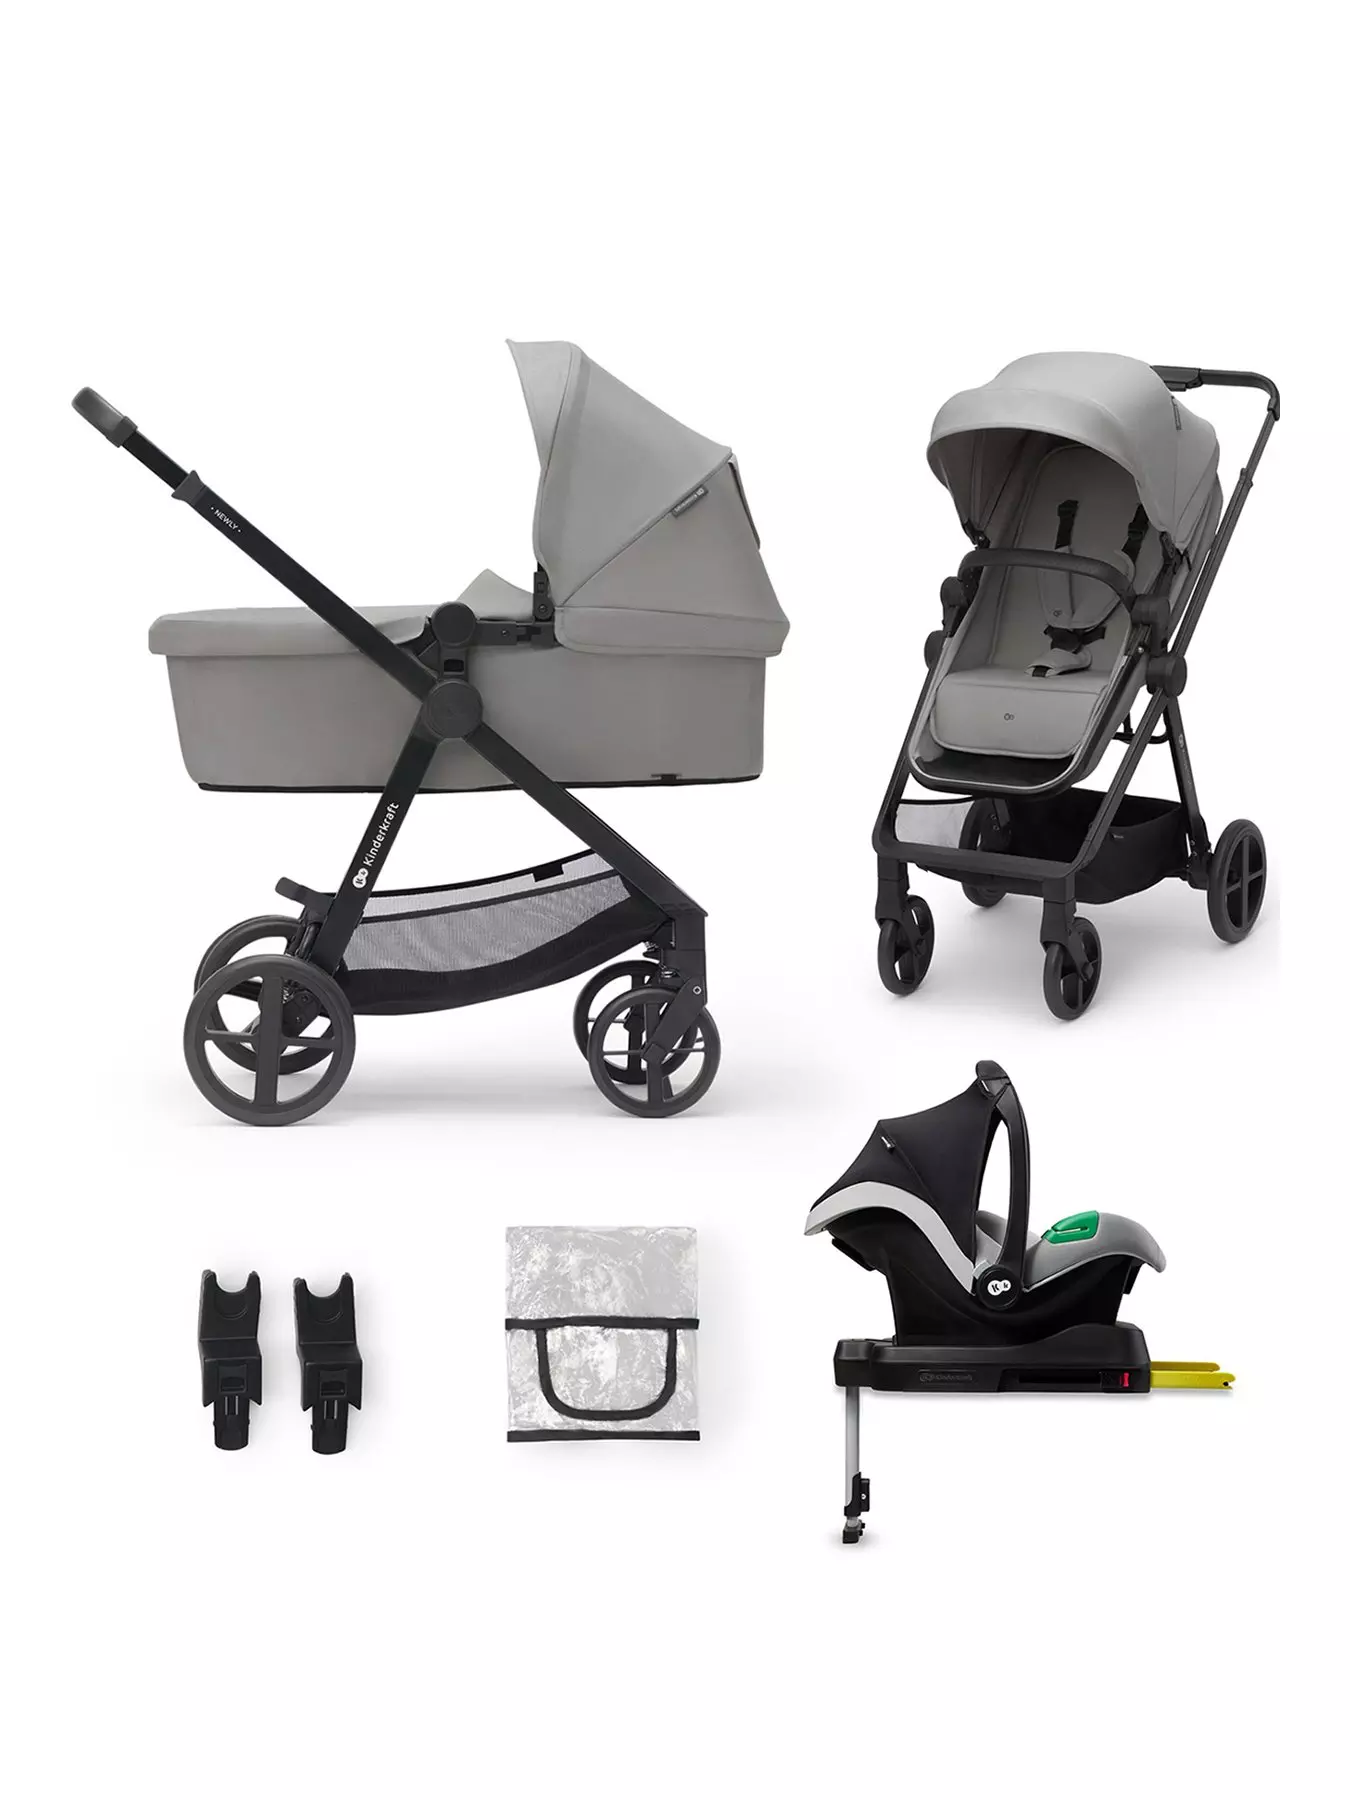 Travel Systems, 3 In 1, Pushchairs, Child & Baby